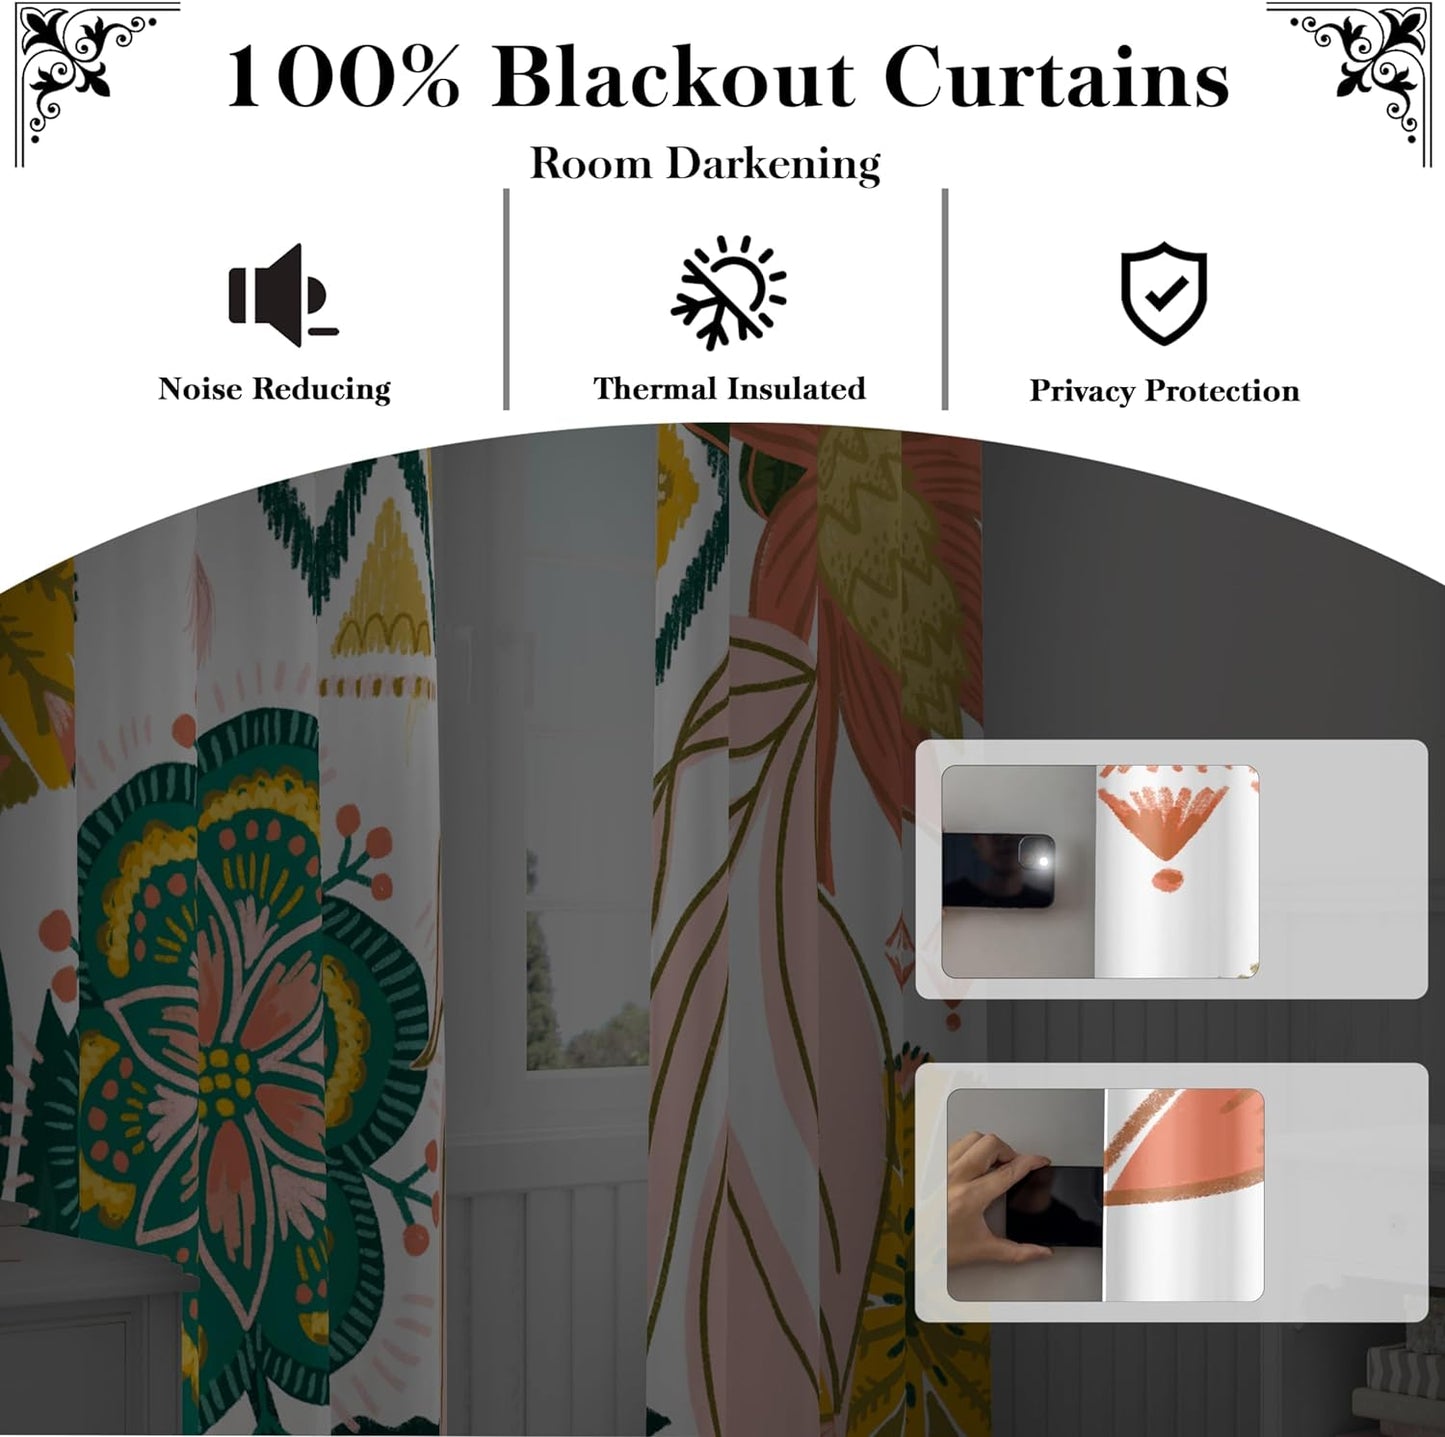 Boho Floral 100% Blackout Curtains for Living Room 96 Inch Long 2 Panels Mid Century Botanical Black Out Curtains for Bedroom Grommet Thermal Insulated Room Darkening Window Drapes,52Wx96L  Tyrot   